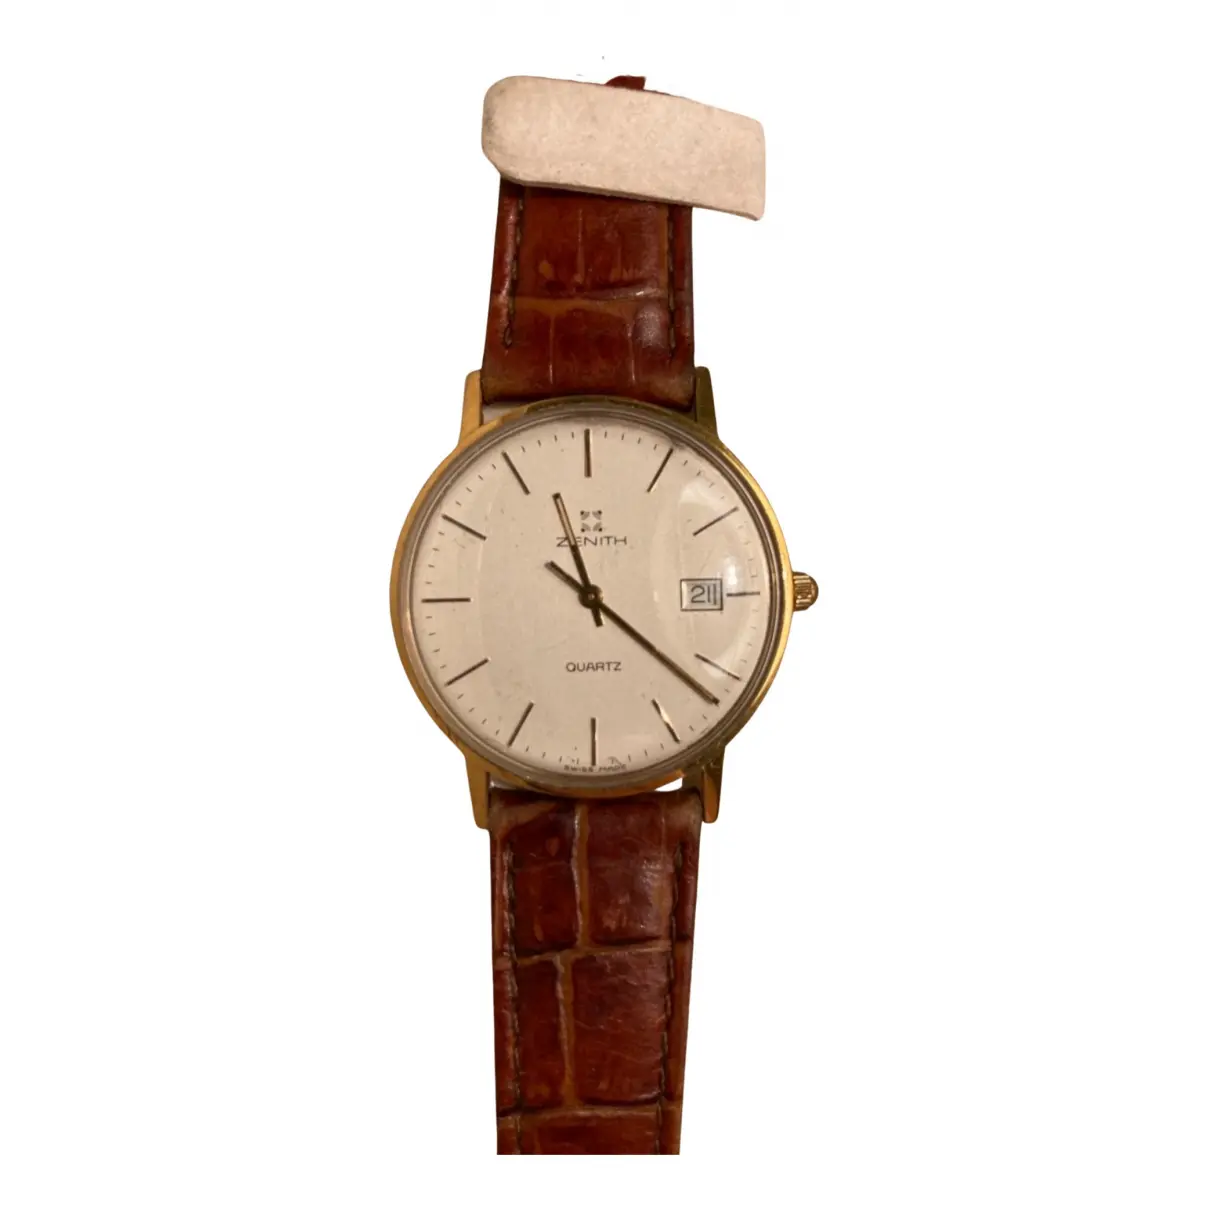 Classique yellow gold watch